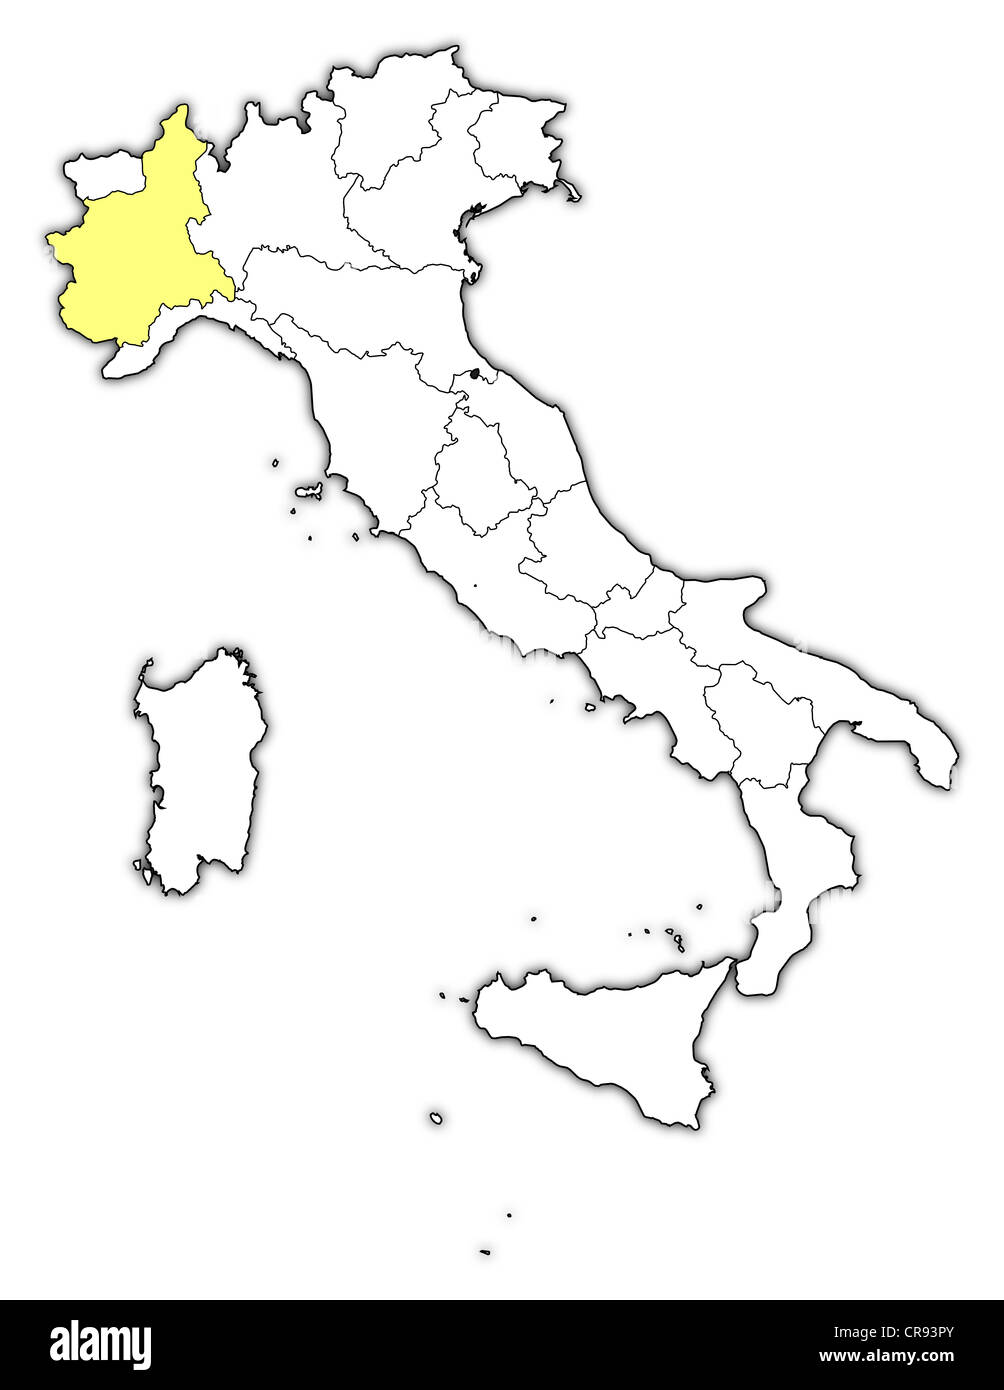 Political map of Italy with the several regions where Piemont is highlighted. Stock Photo